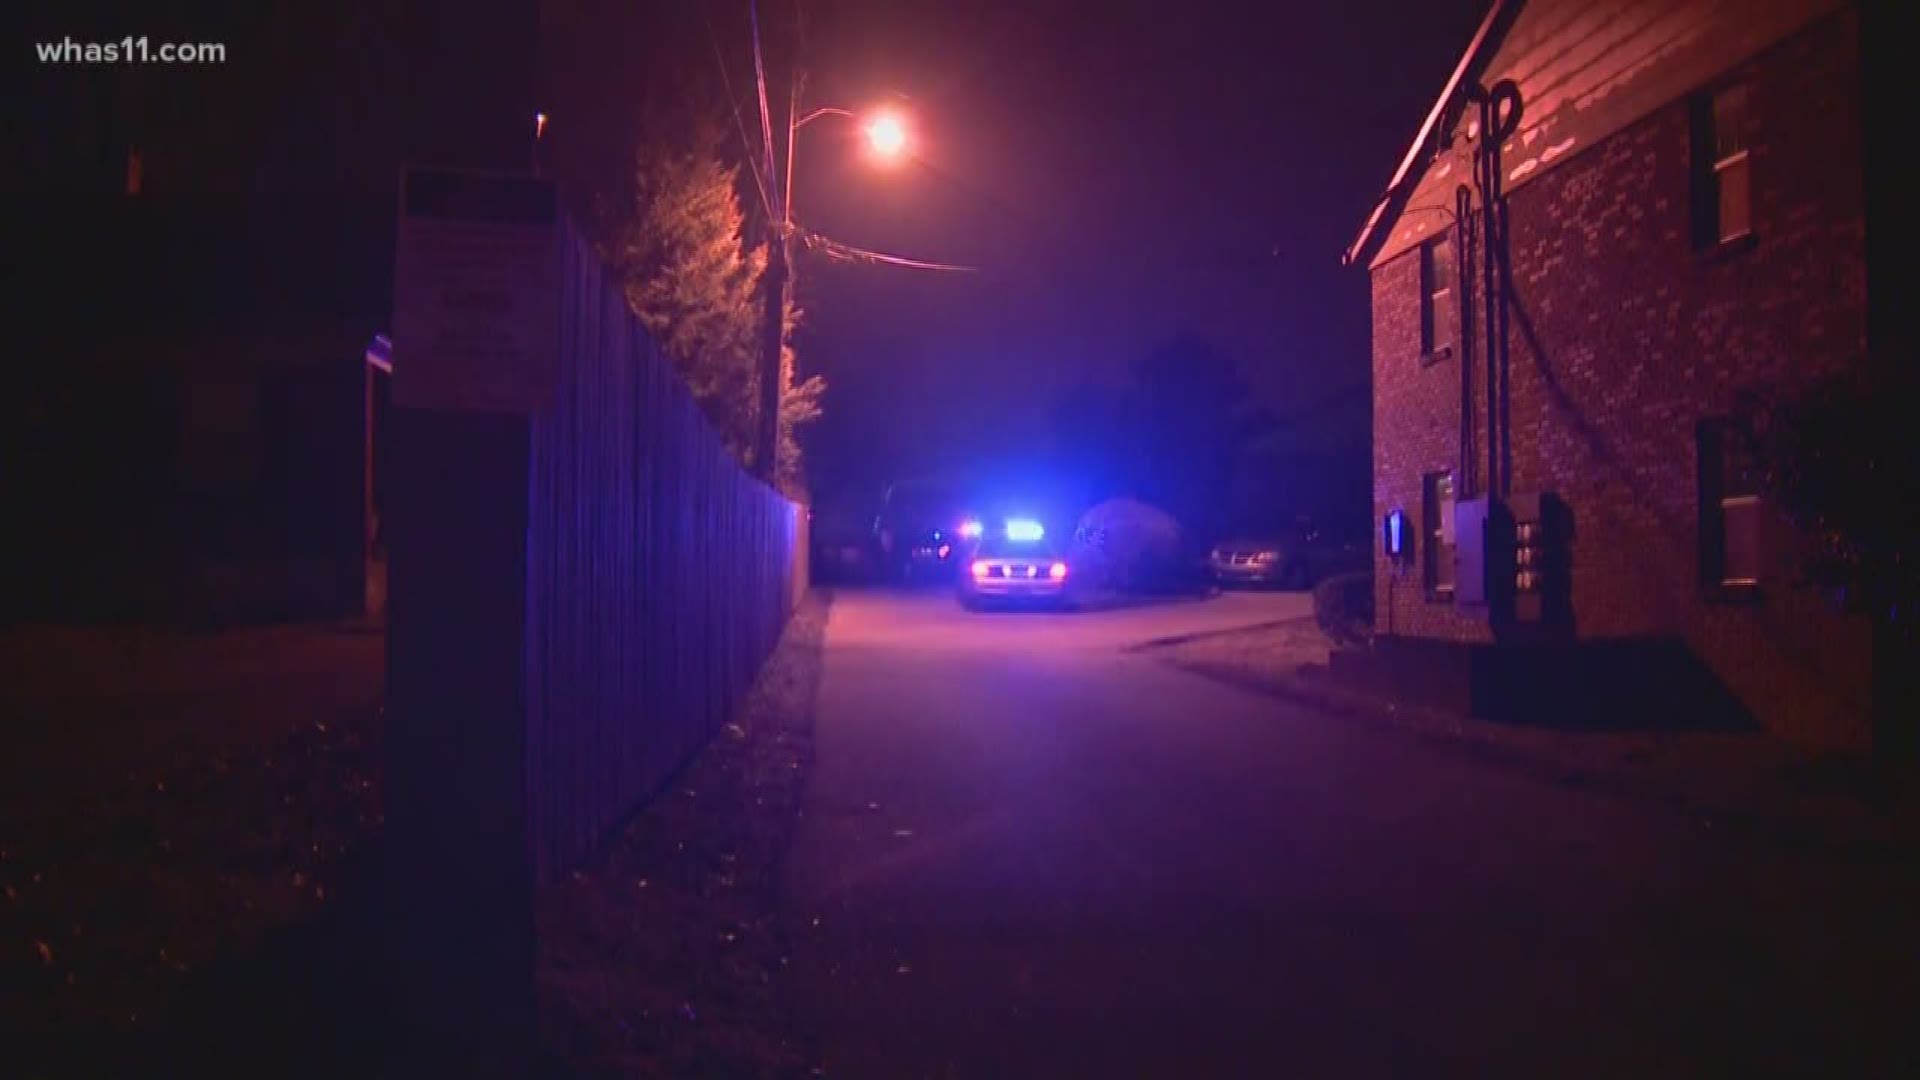 The body of a man in his late teens or 20s was found on Nob Hill Lane early Wednesday morning.